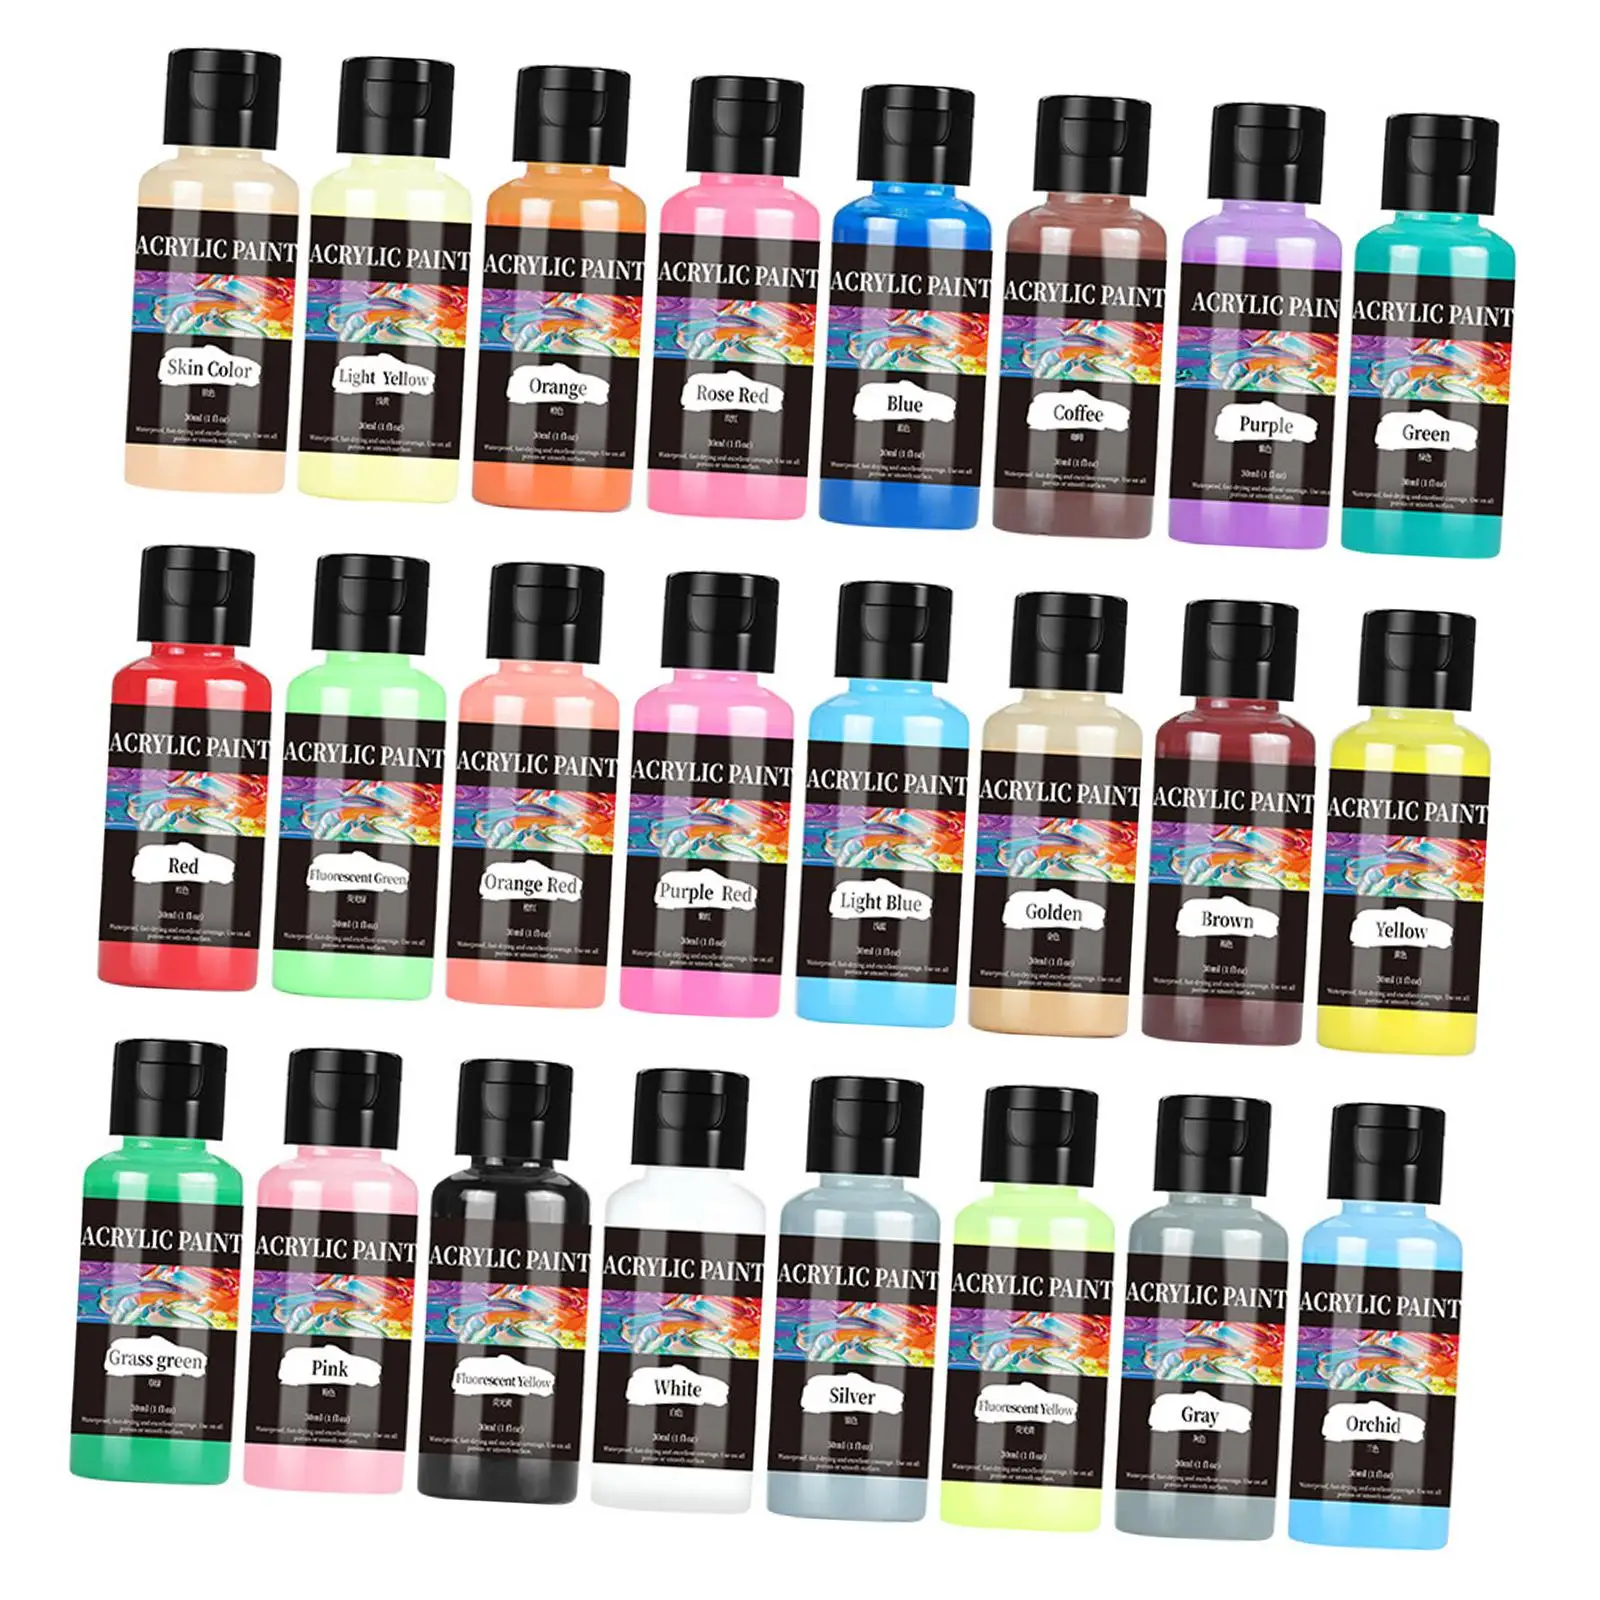 24x Acrylic Leather Paint Set DIY Art Craft Project Professional Acrylic Leather Dye Fit Paper Beginner Shoes Car Seat Sneakers